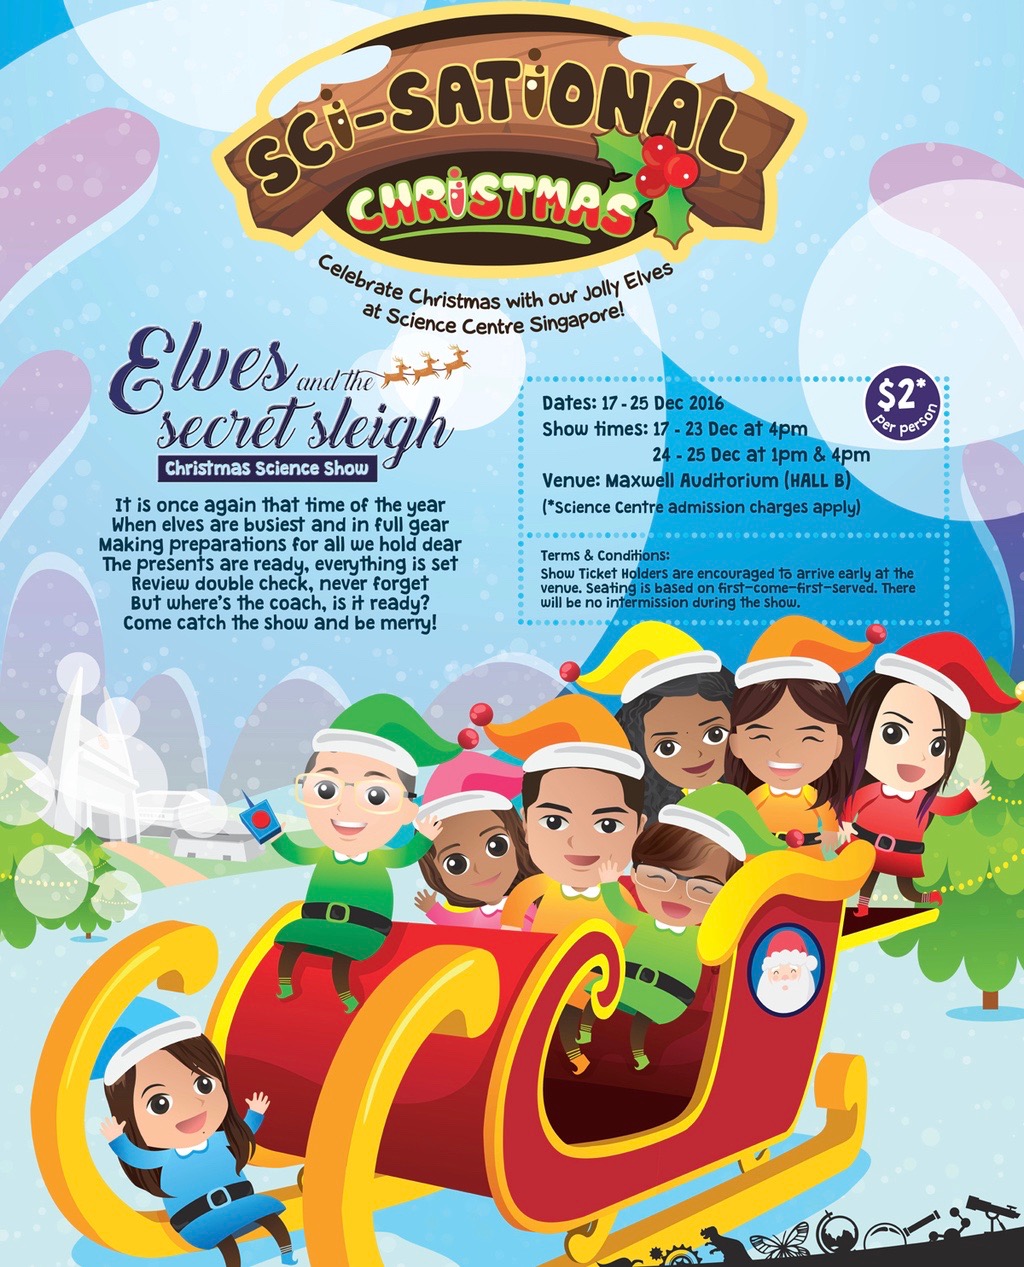 Sci-sational Christmas at Science Centre Singapore